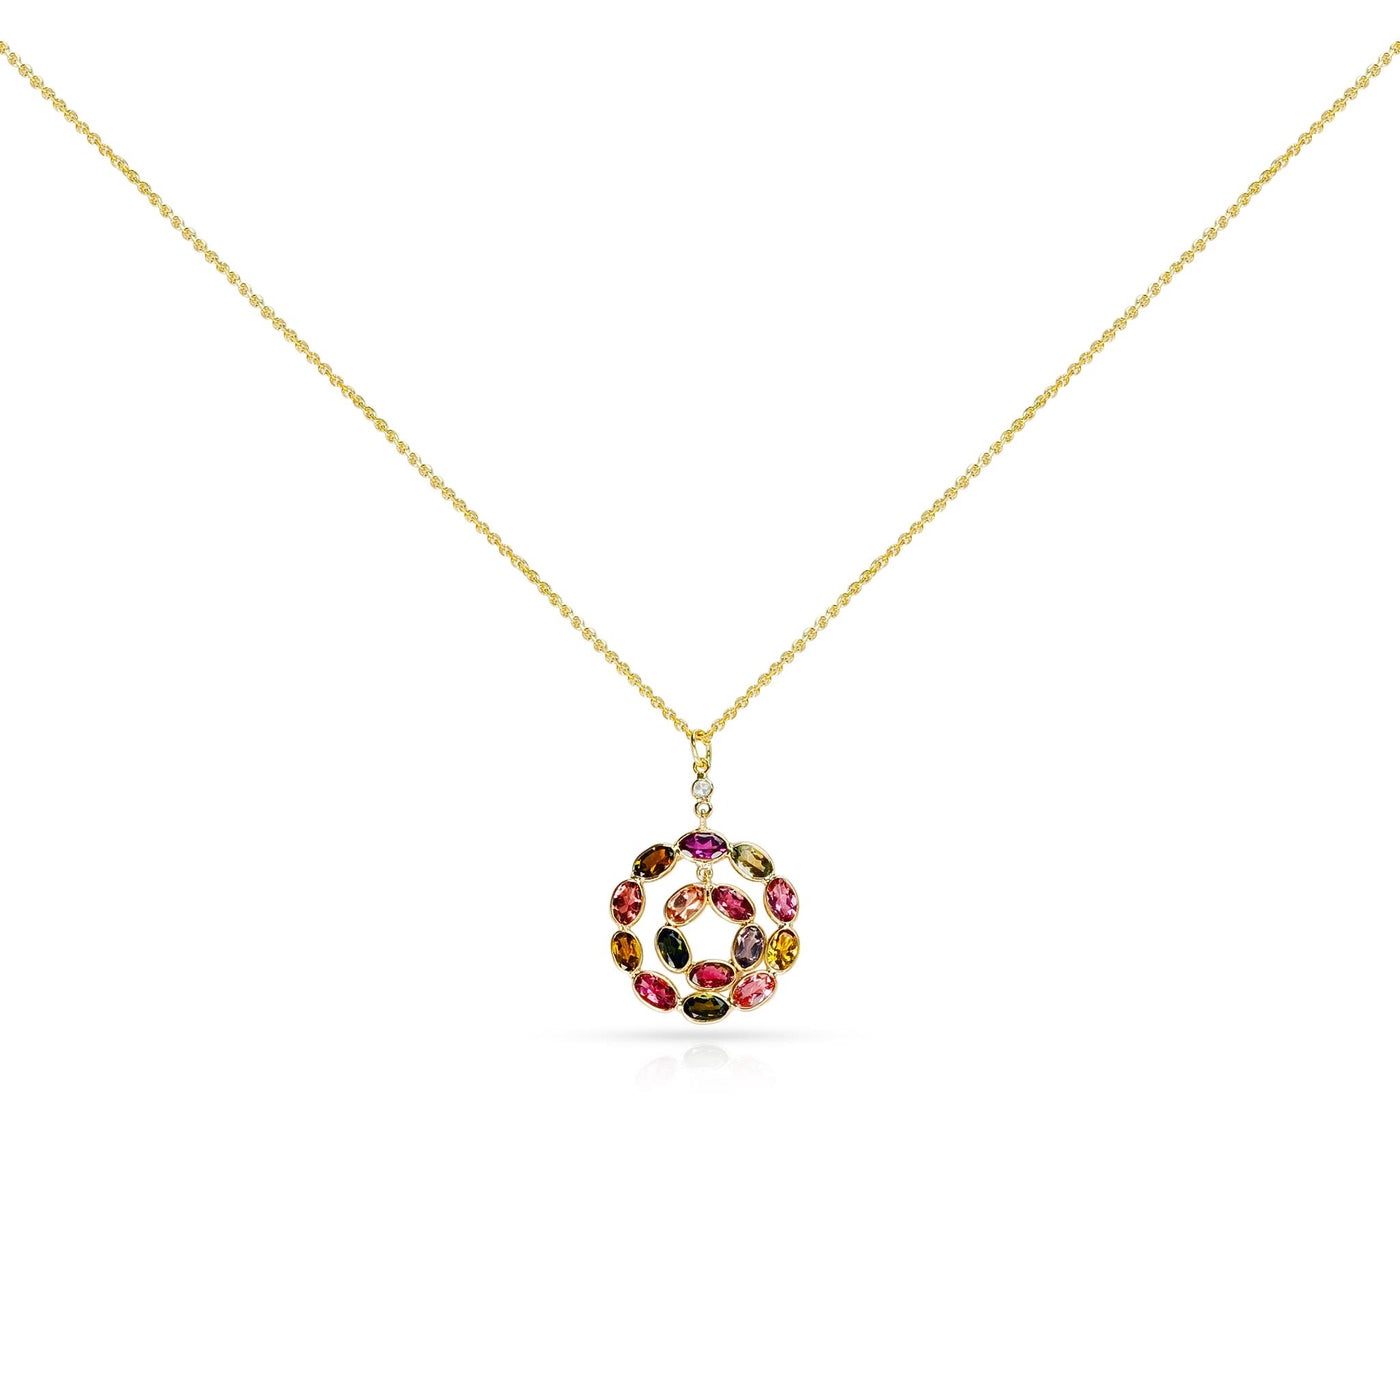 14K Yellow Gold 3.15ctw Circle Style Necklace